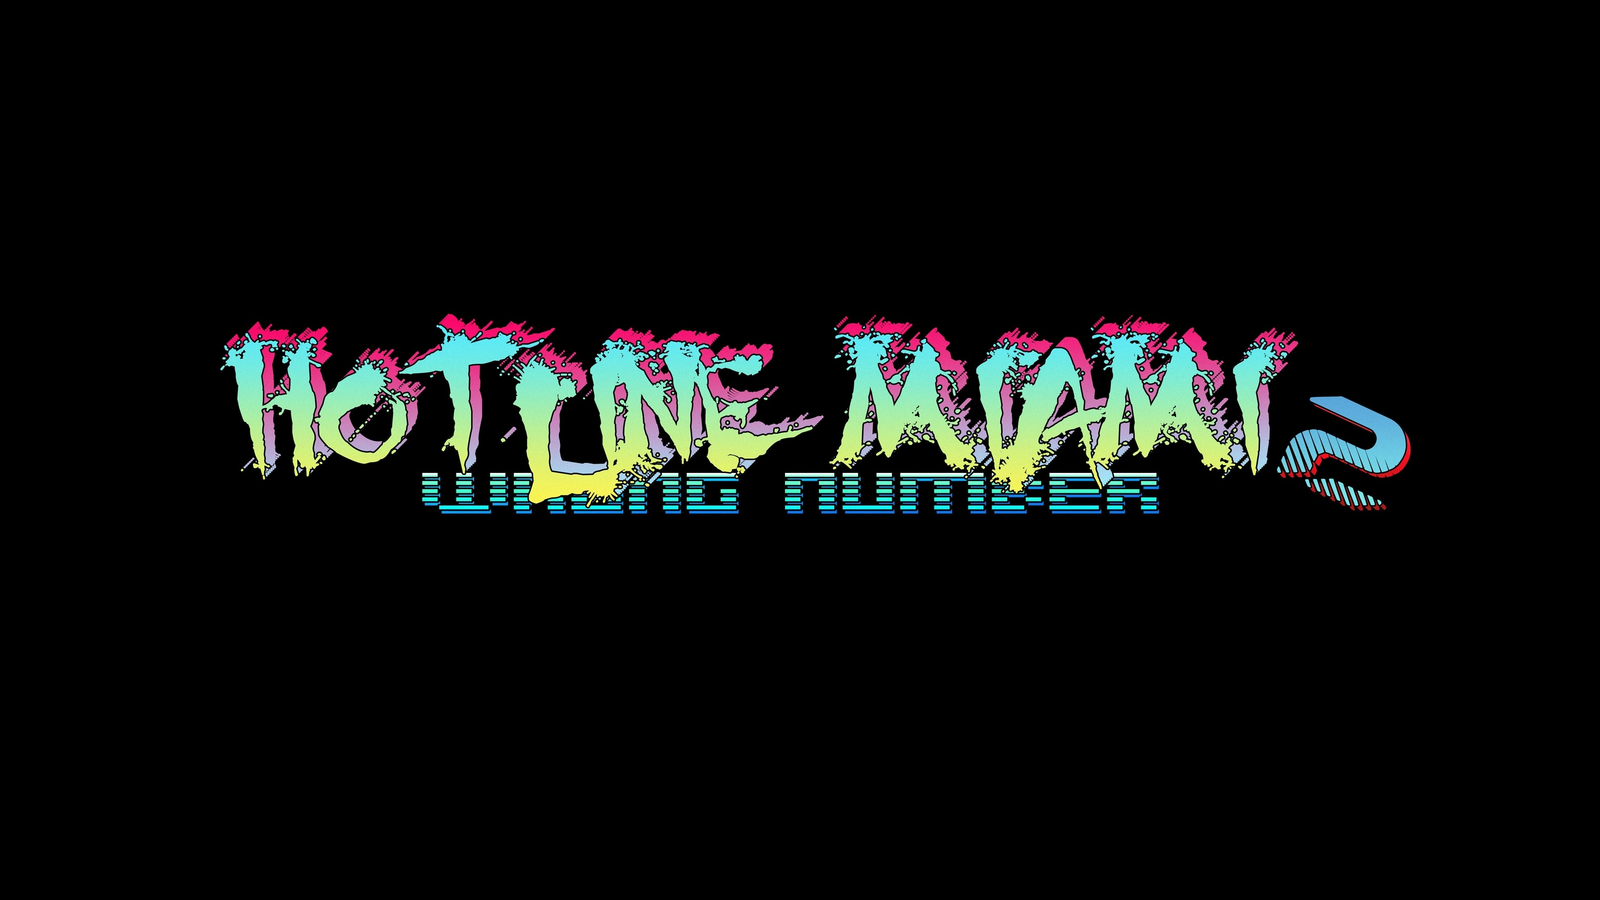 Hotline Miami Wrong Number Wallpaper 4k By Artistknight332 On